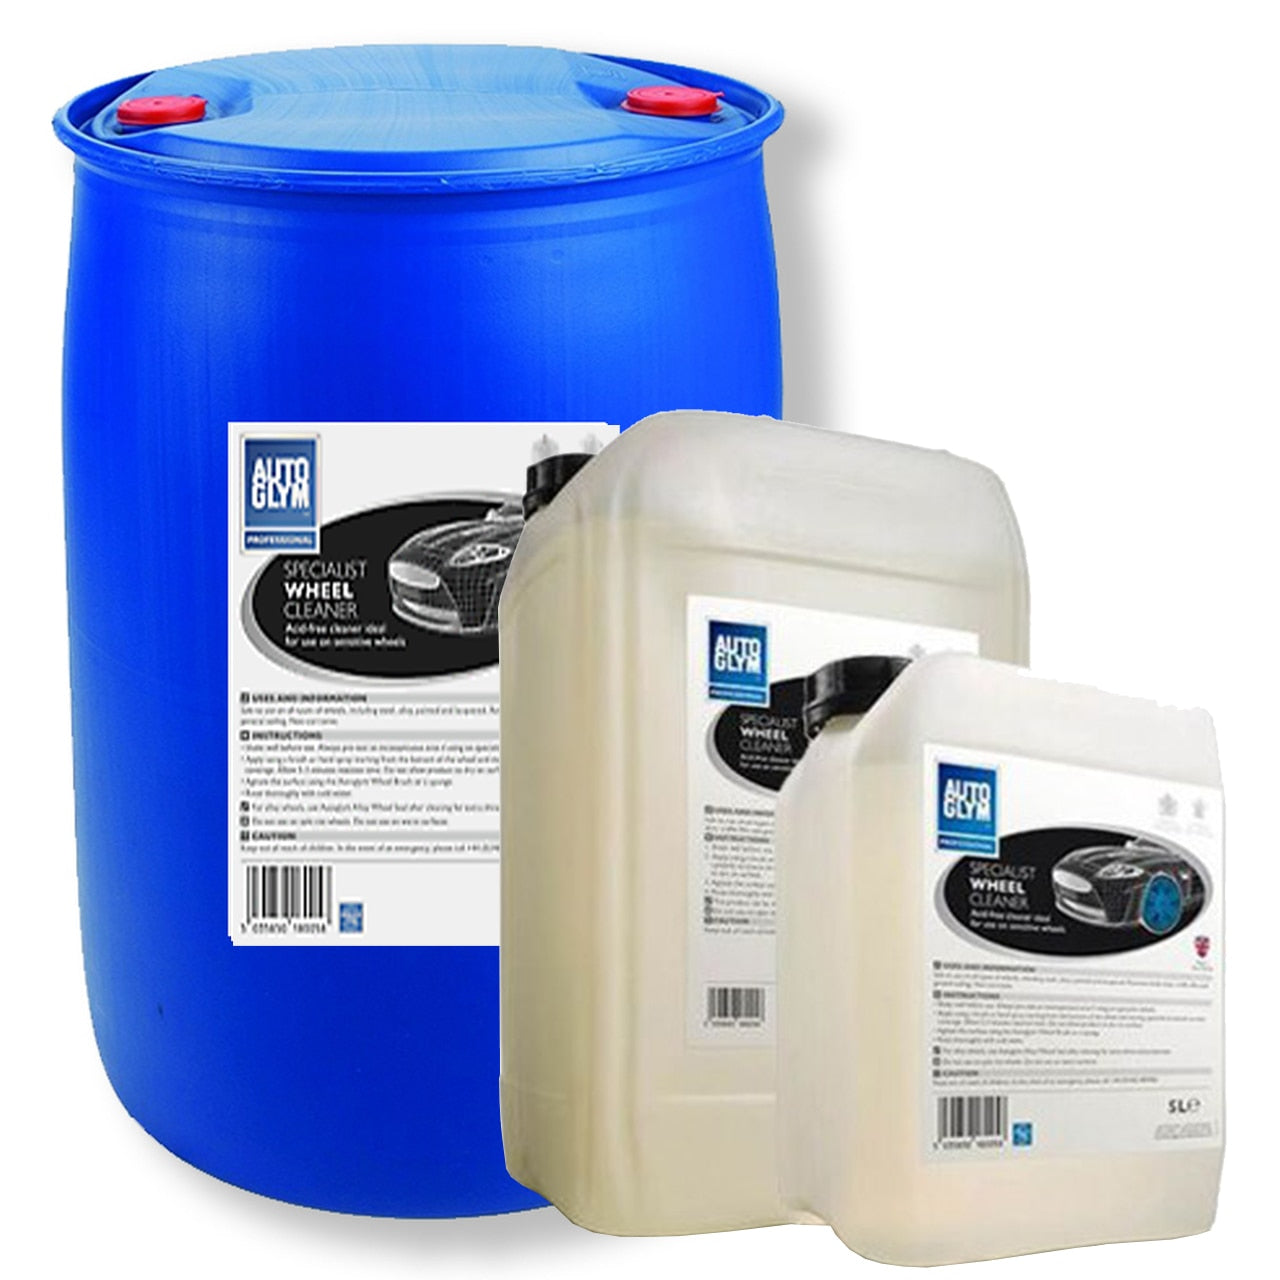 Autlgym Specialist Wheel Cleaner 5L container. Blue wheels. Safe wheel cleaner Autoglym. Specialist Wheel Cleaner 25L and 200L